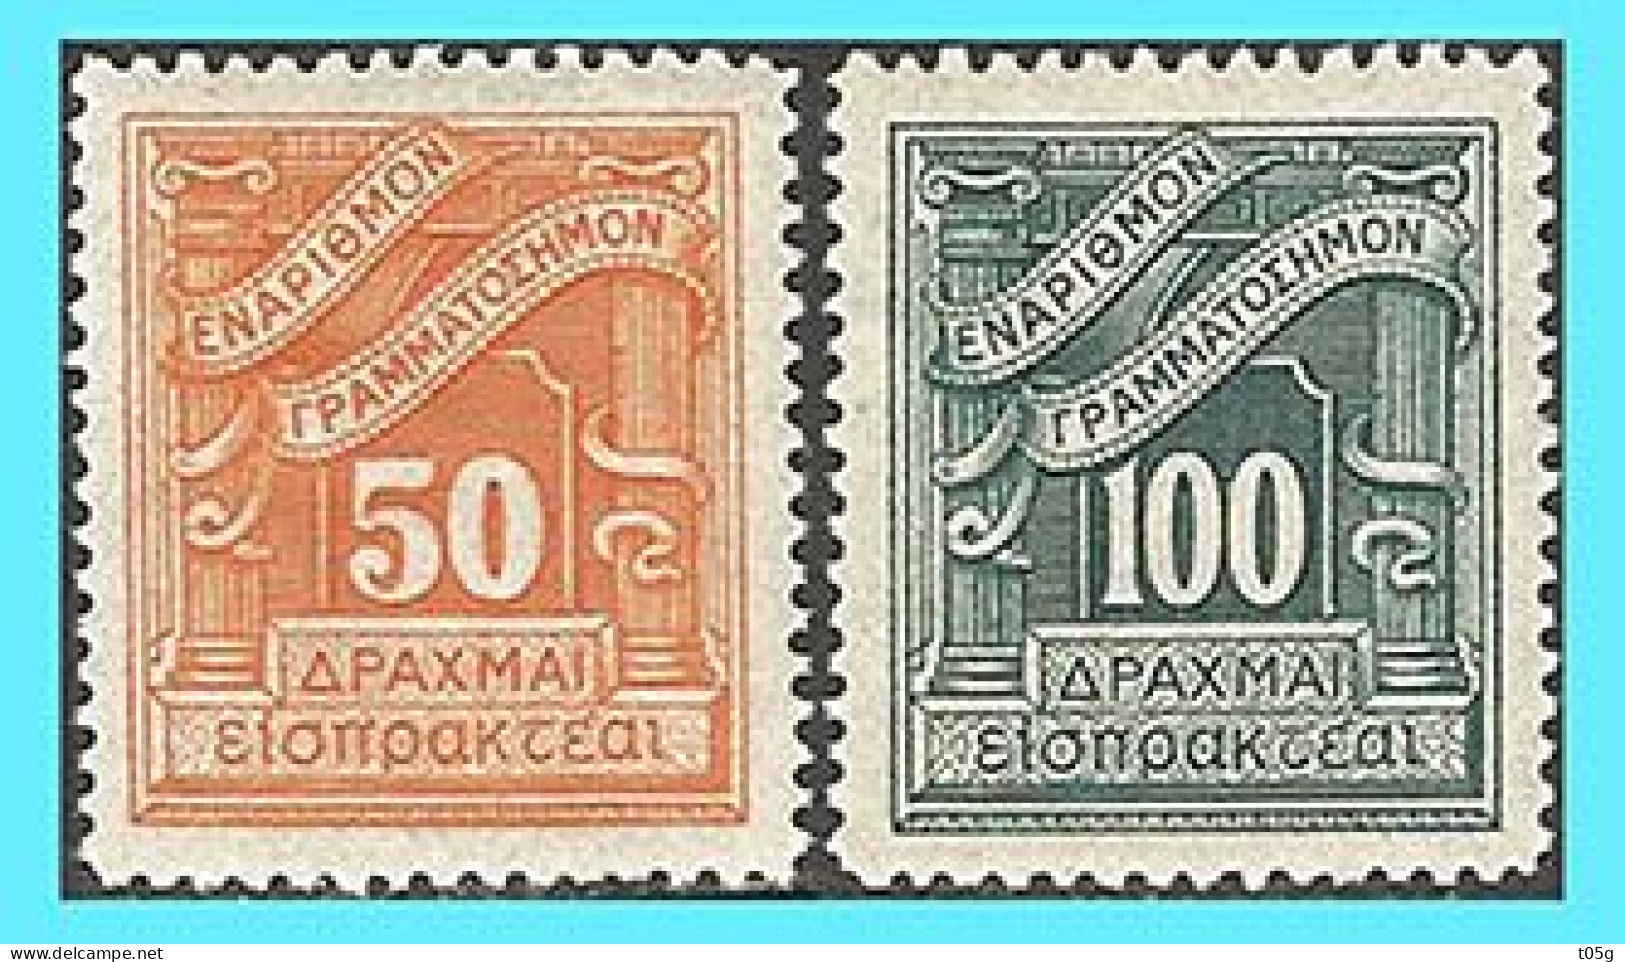 GREECE- GRECE-HELLAS 1935:  Postage Due  Lithographic Issue Compl. set MNH** - Nuovi